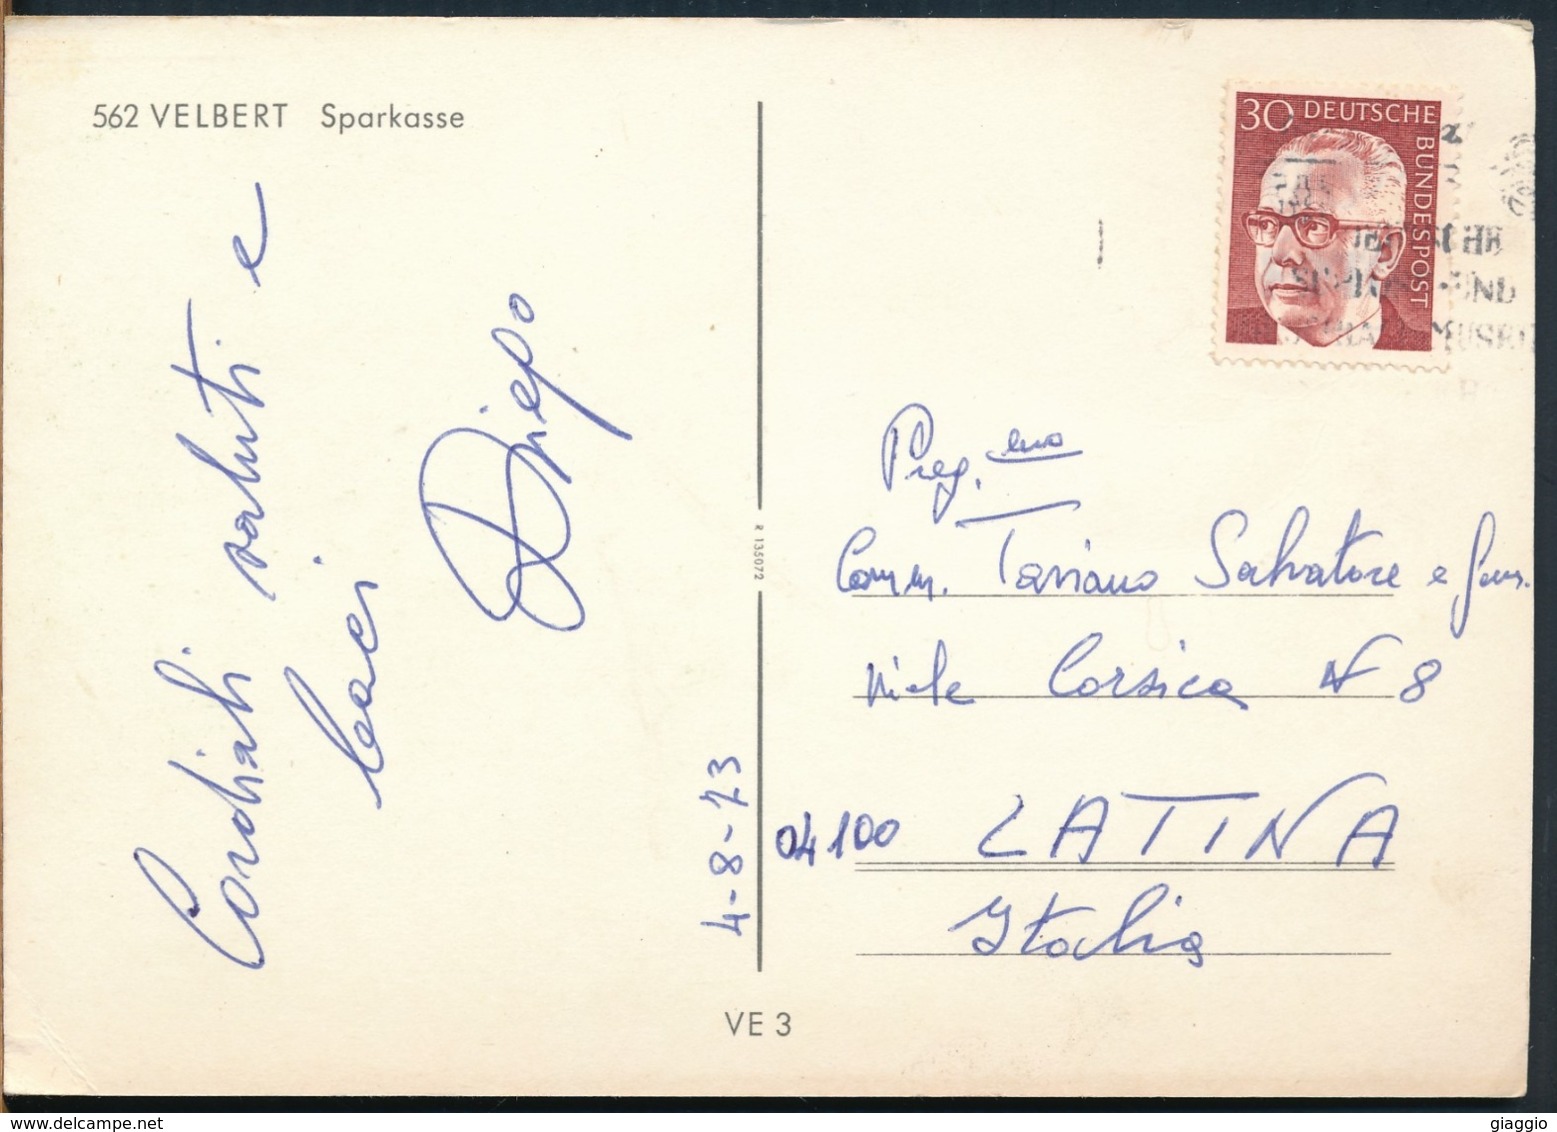 °°° 14557 - GERMANY - VELBERT - SPARKASSE - 1973 With Stamps °°° - Velbert